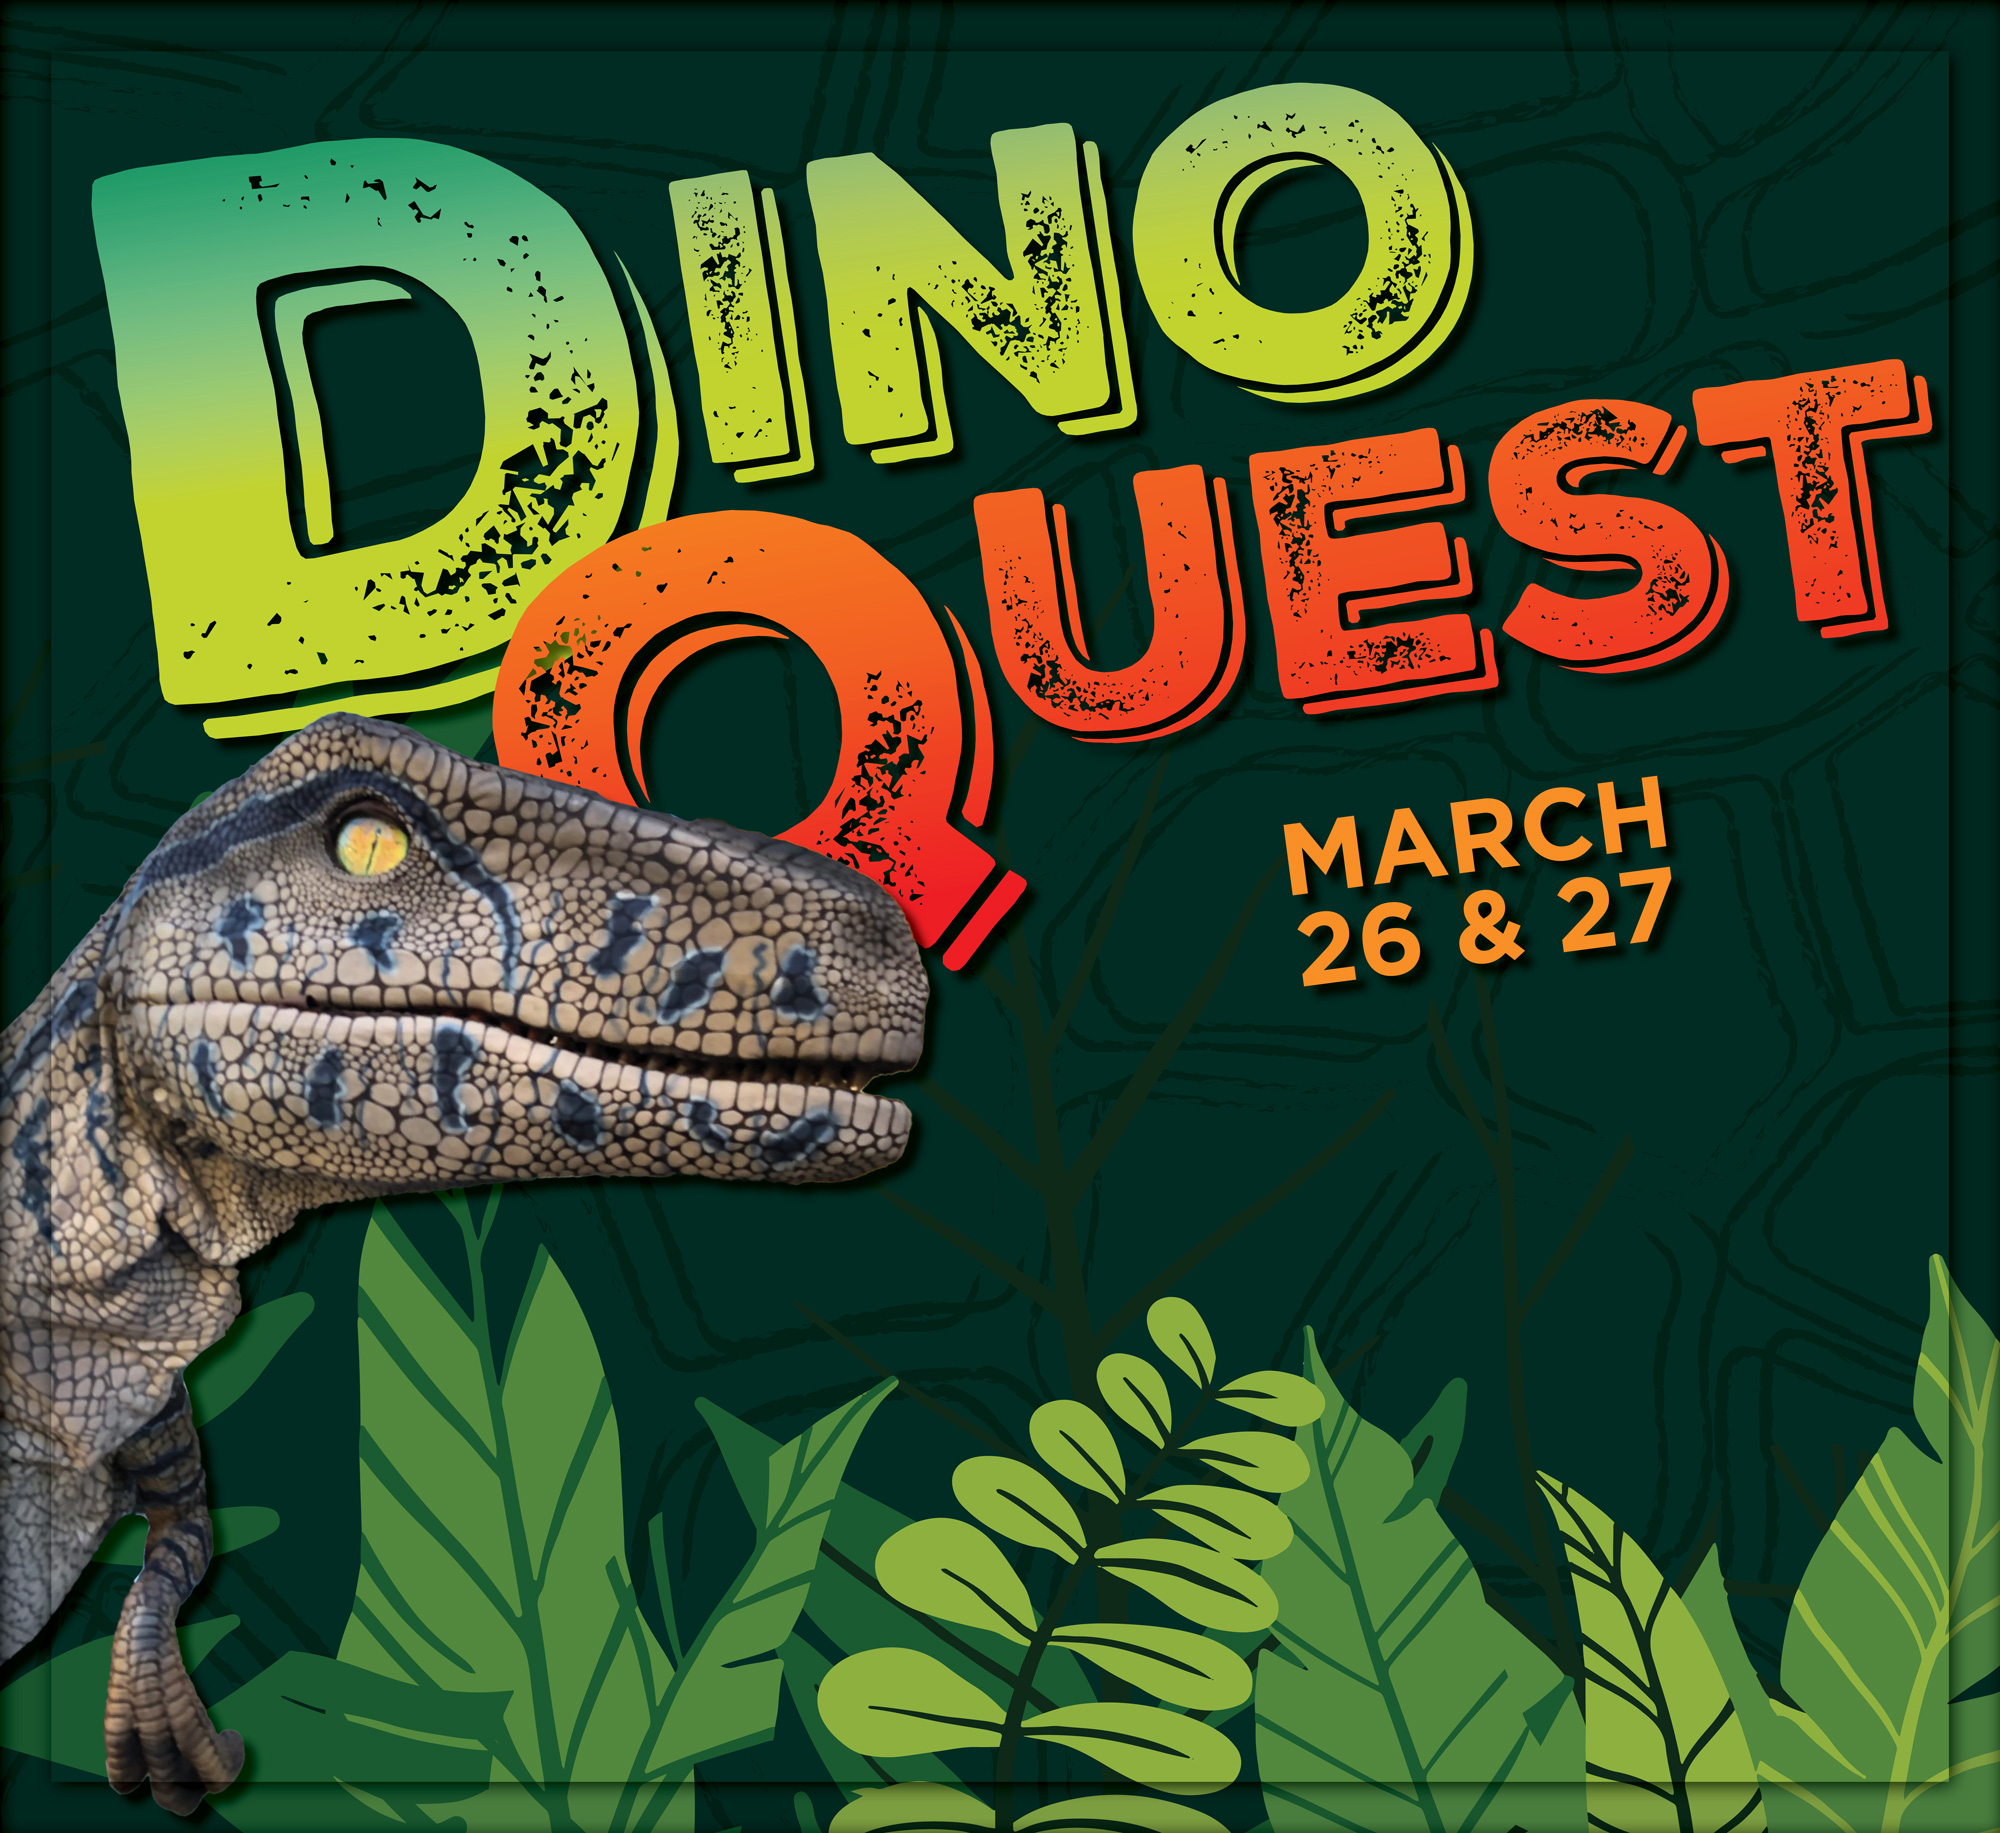 Promotion Graphic for Dino Quest in Science City. Featuring a velociraptor on a green, foliage inspired background.